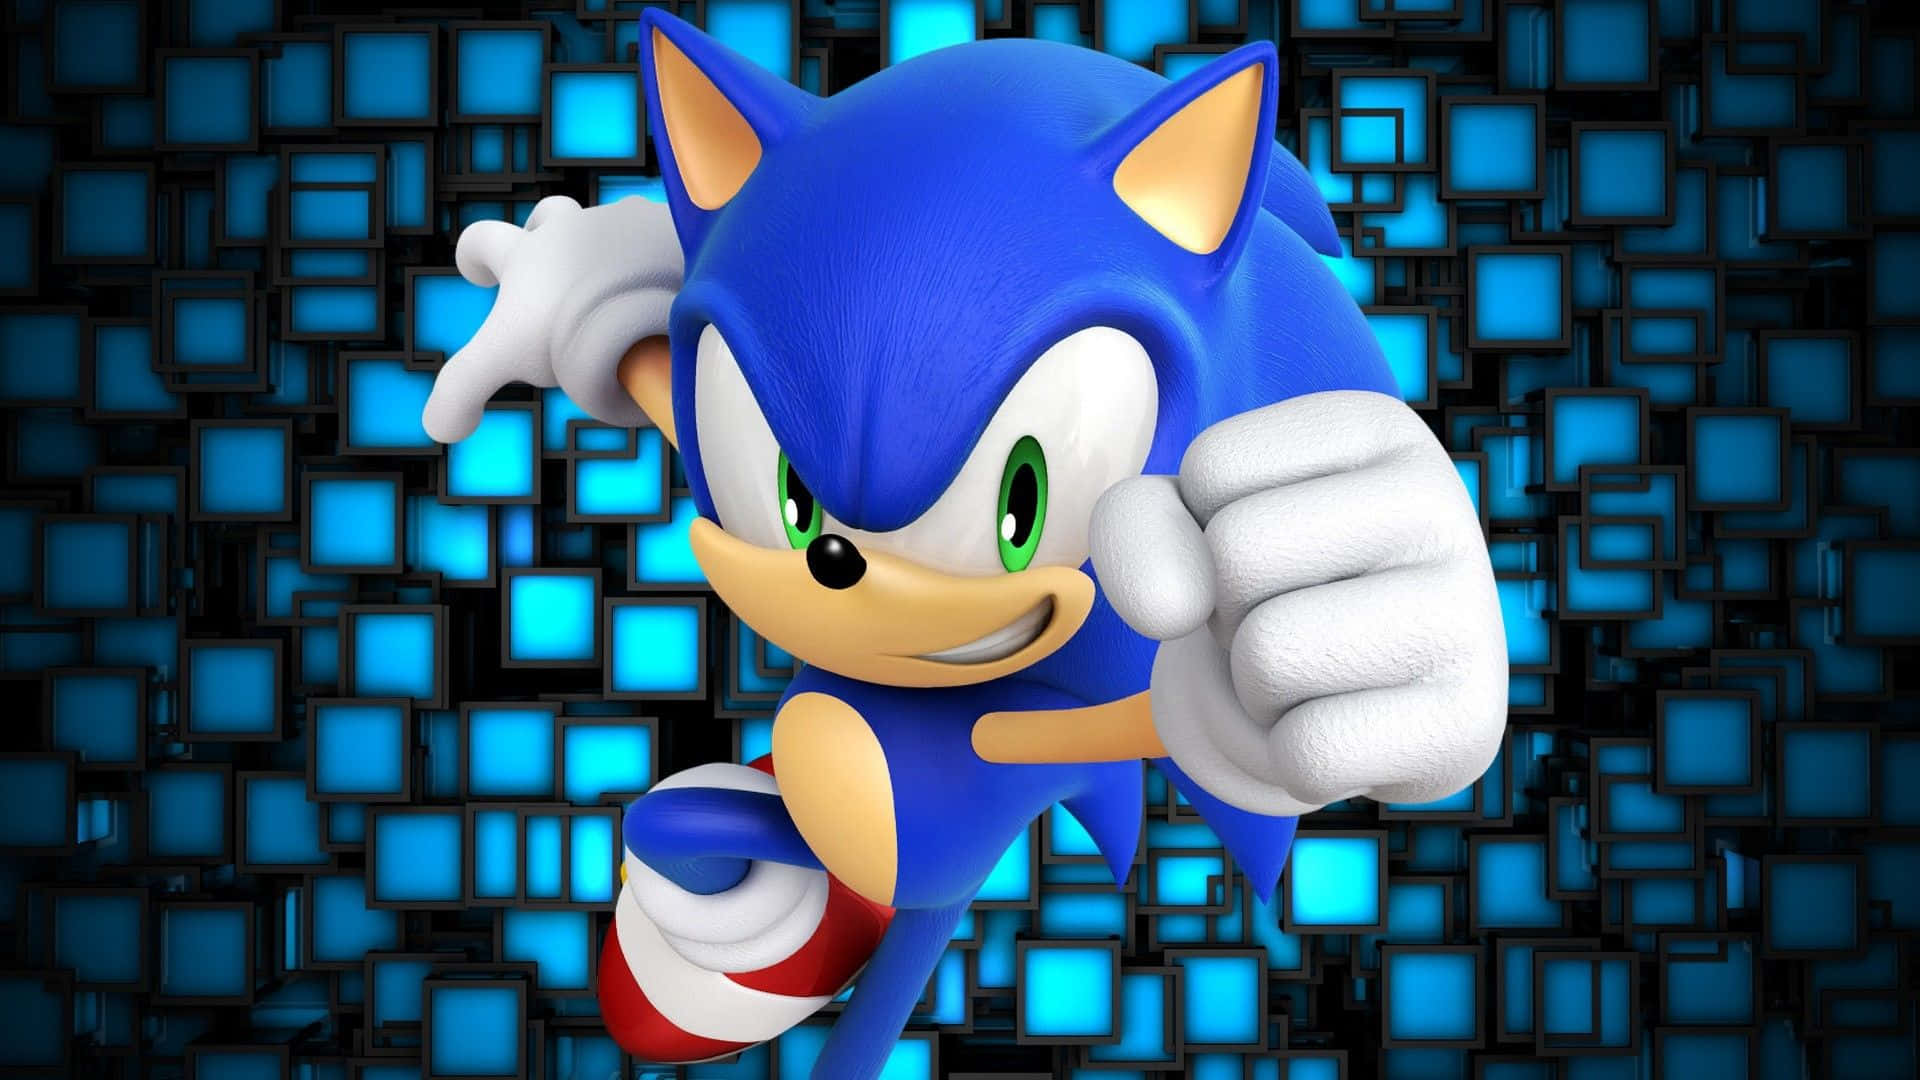 Join the Fastest Hedgehog on Earth with Sonic 2 HD Wallpaper